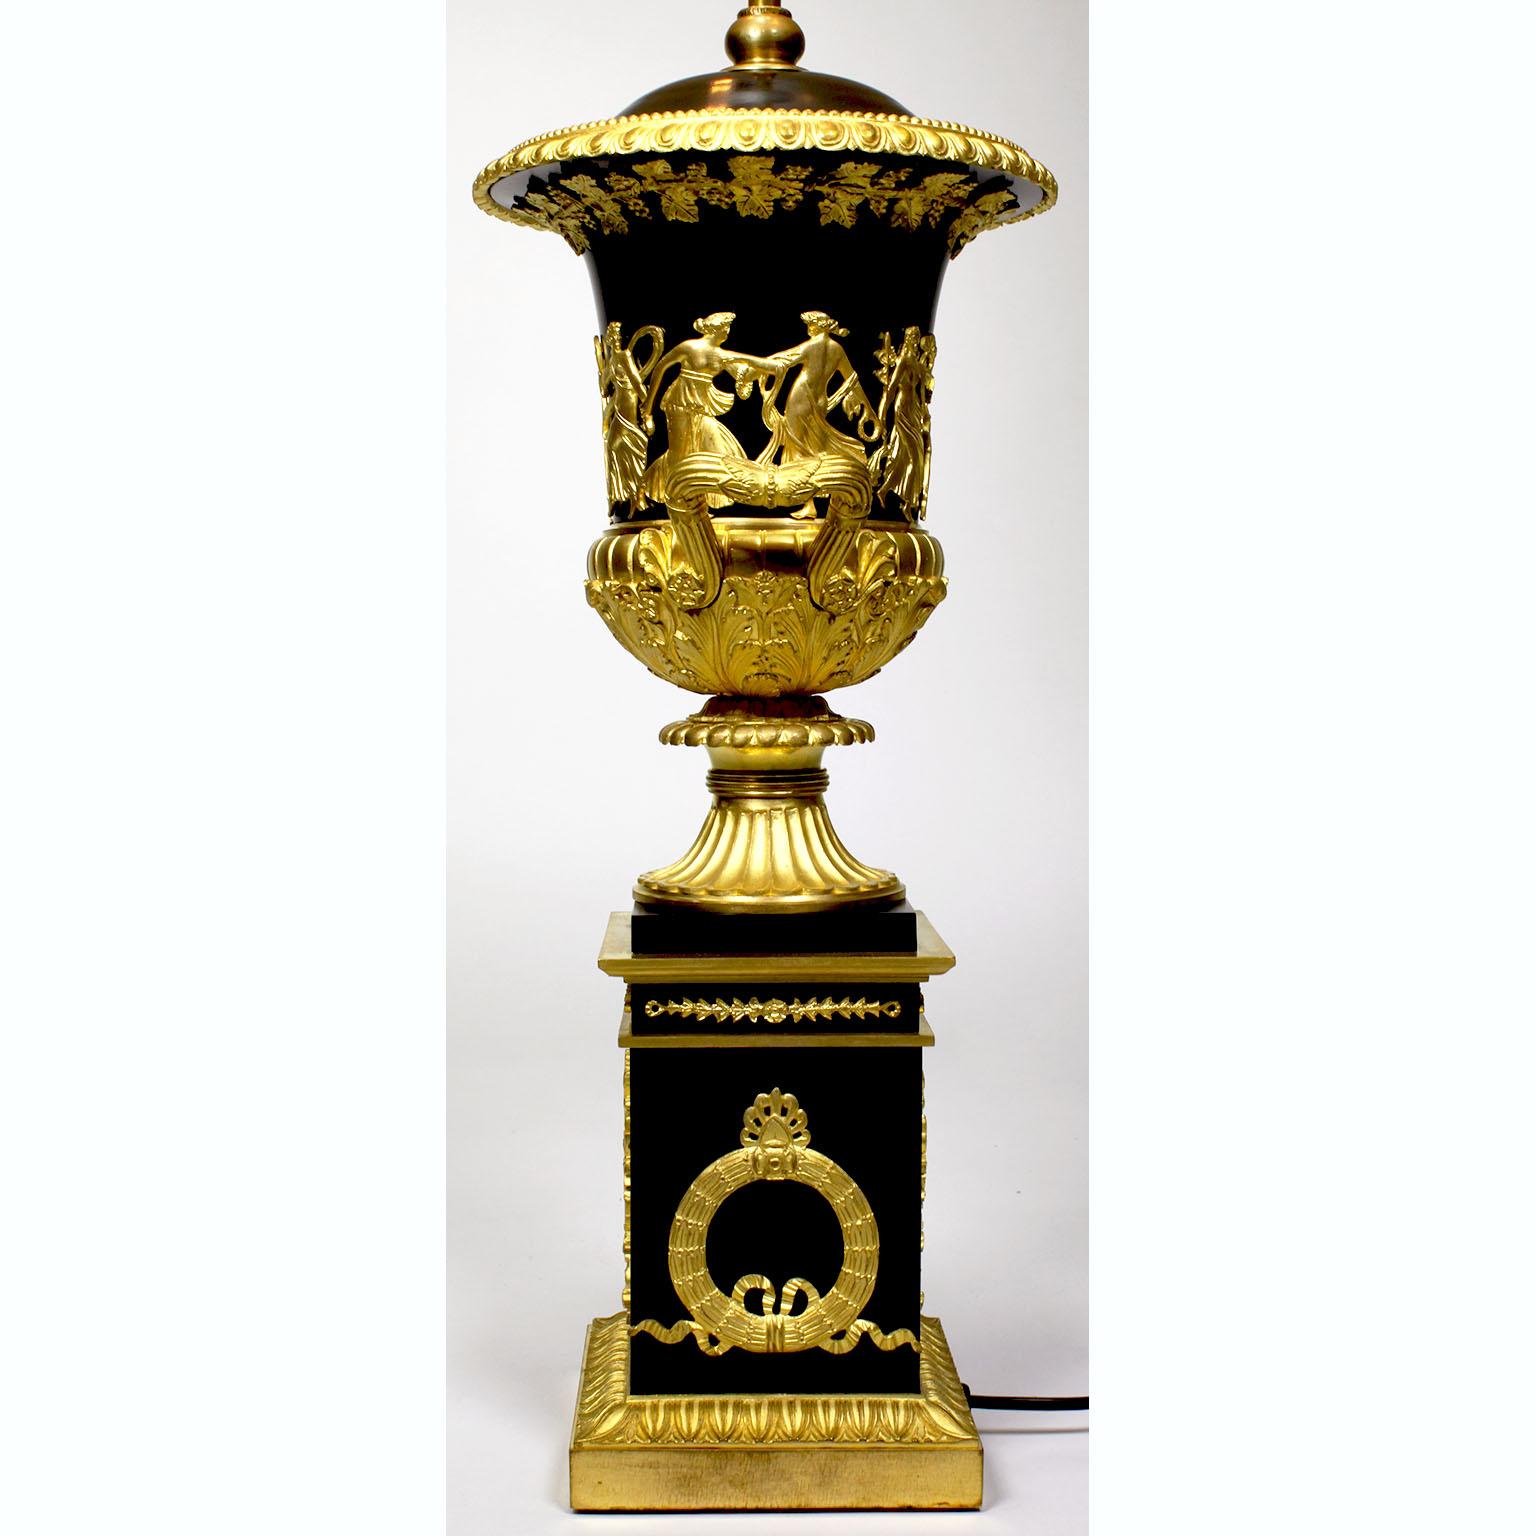 Pair French 19th Century Napoleon III Empire Style Gilt-Bronze Urn Table Lamps In Good Condition For Sale In Los Angeles, CA